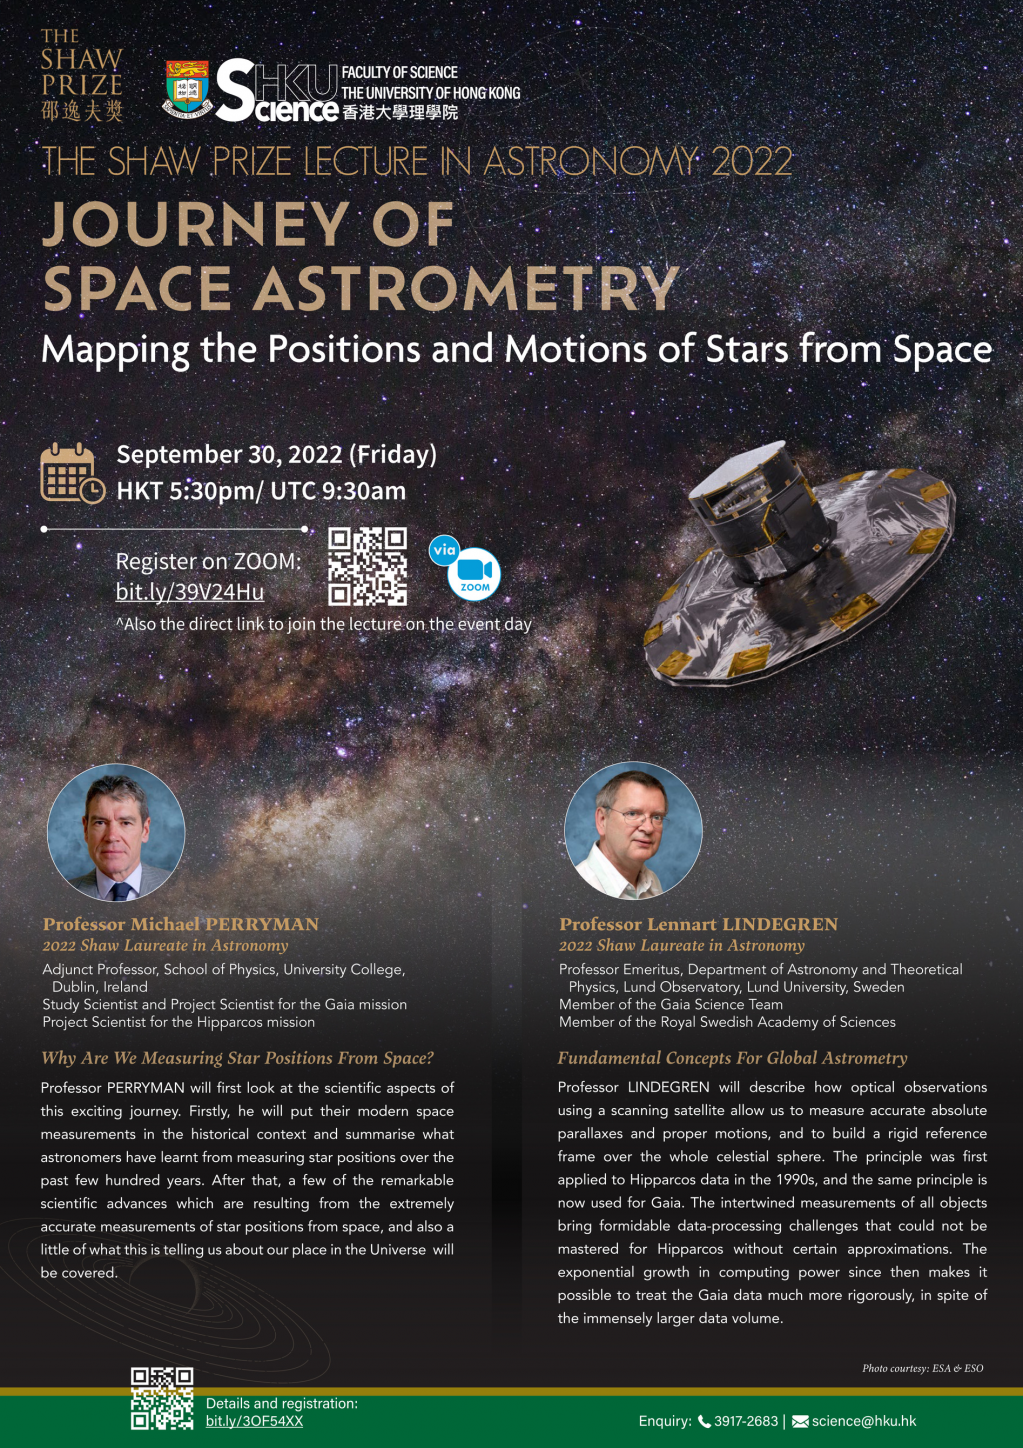 The Shaw Prize Lecture in Astronomy 2022 (September 30, 2022)